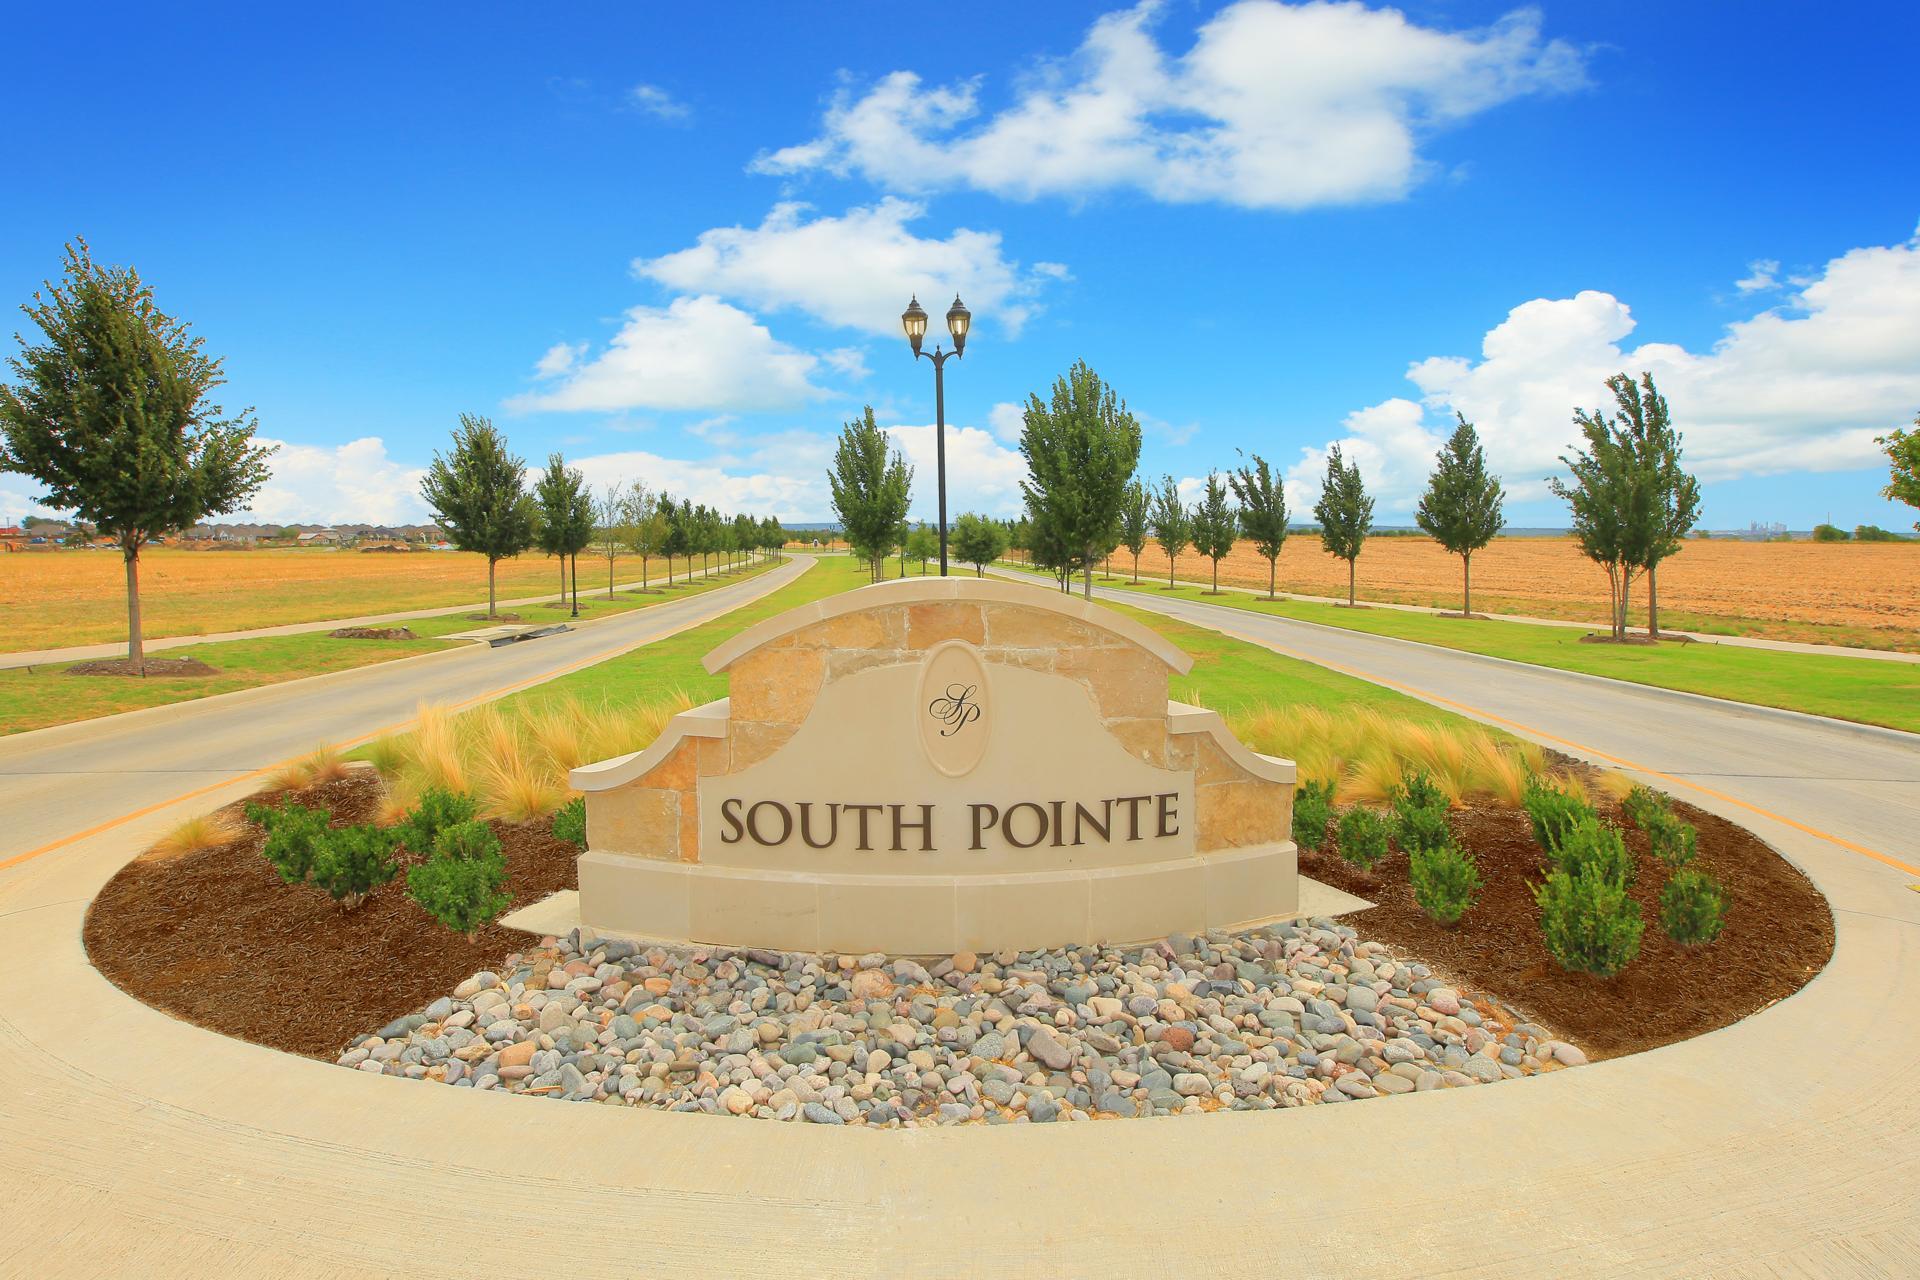 The South Pointe Community Entrance